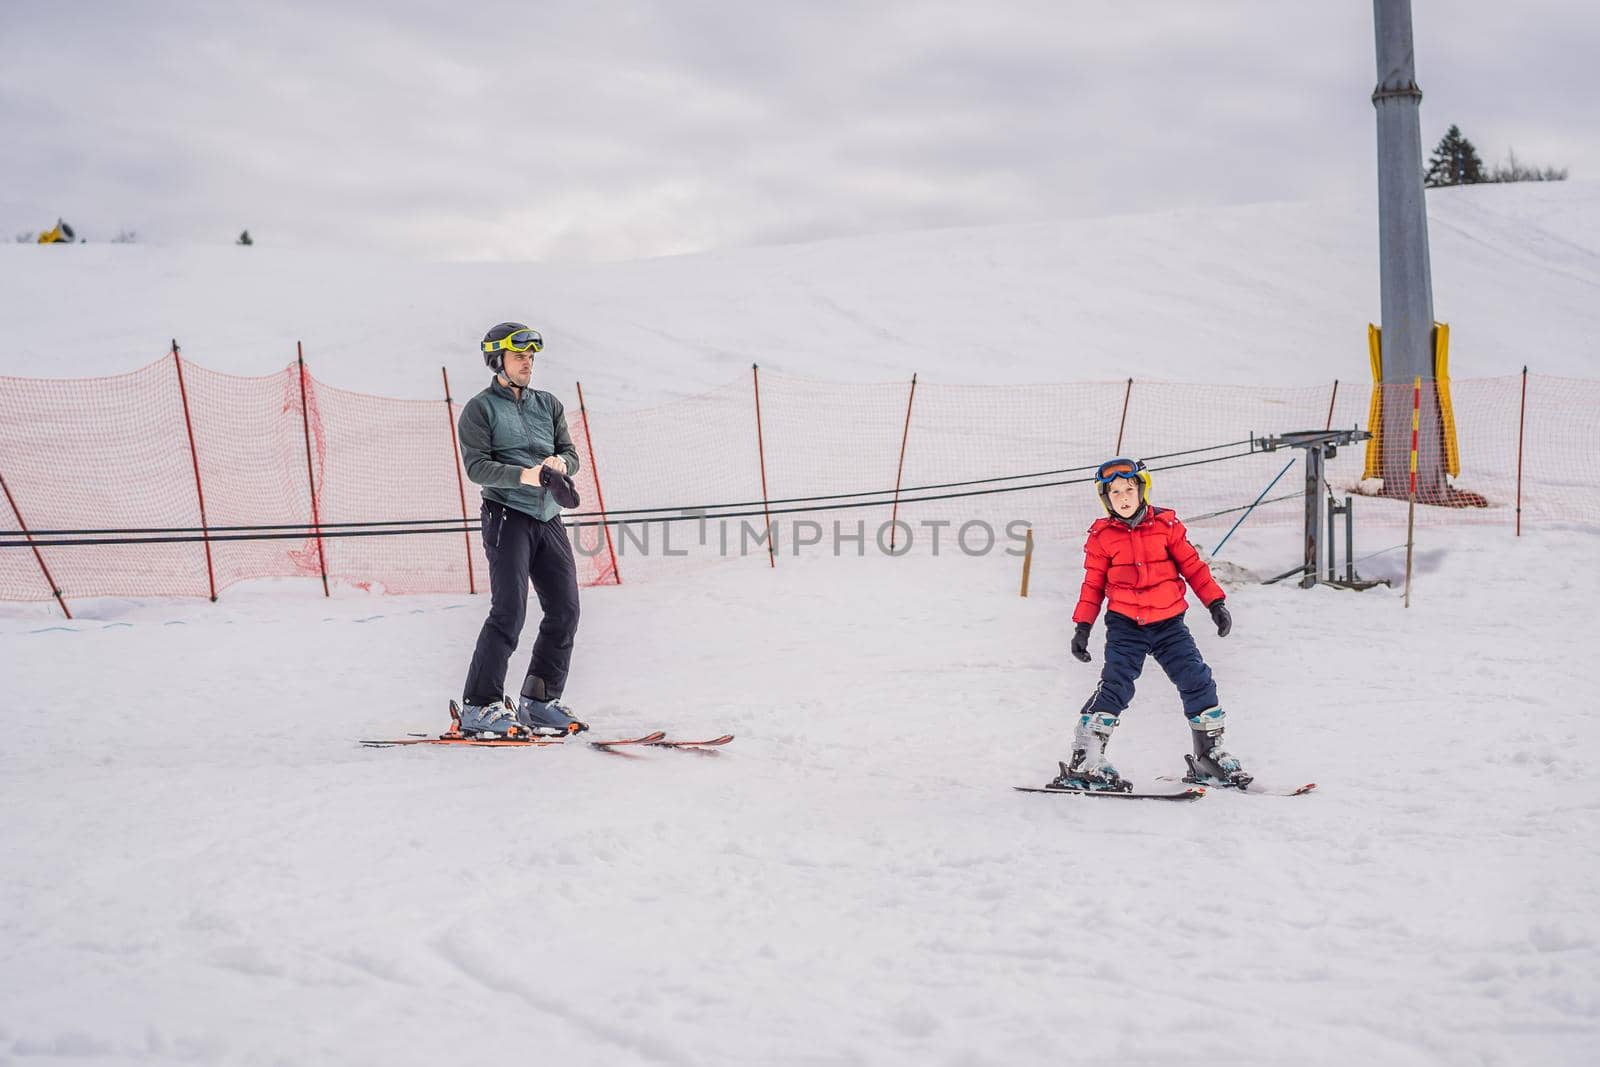 Boy learning to ski, training and listening to his ski instructor on the slope in winter.